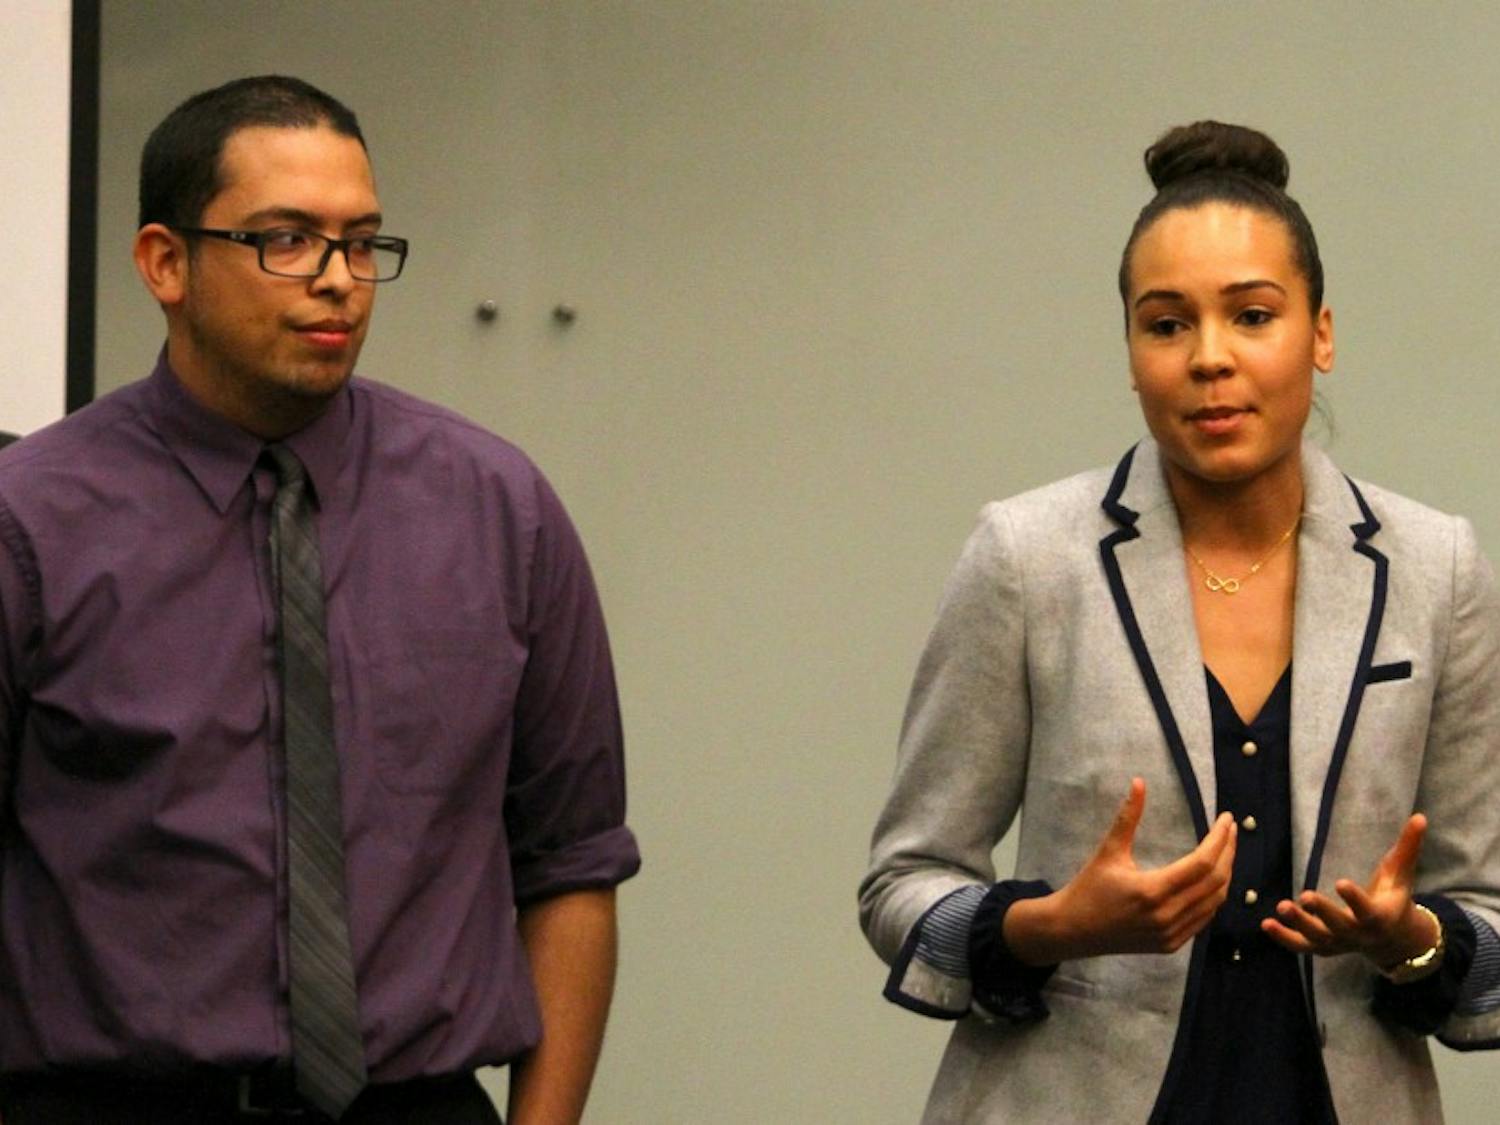 AccessDuke presented an initiative to change University policies regarding undocumented students at the DSG meeting.